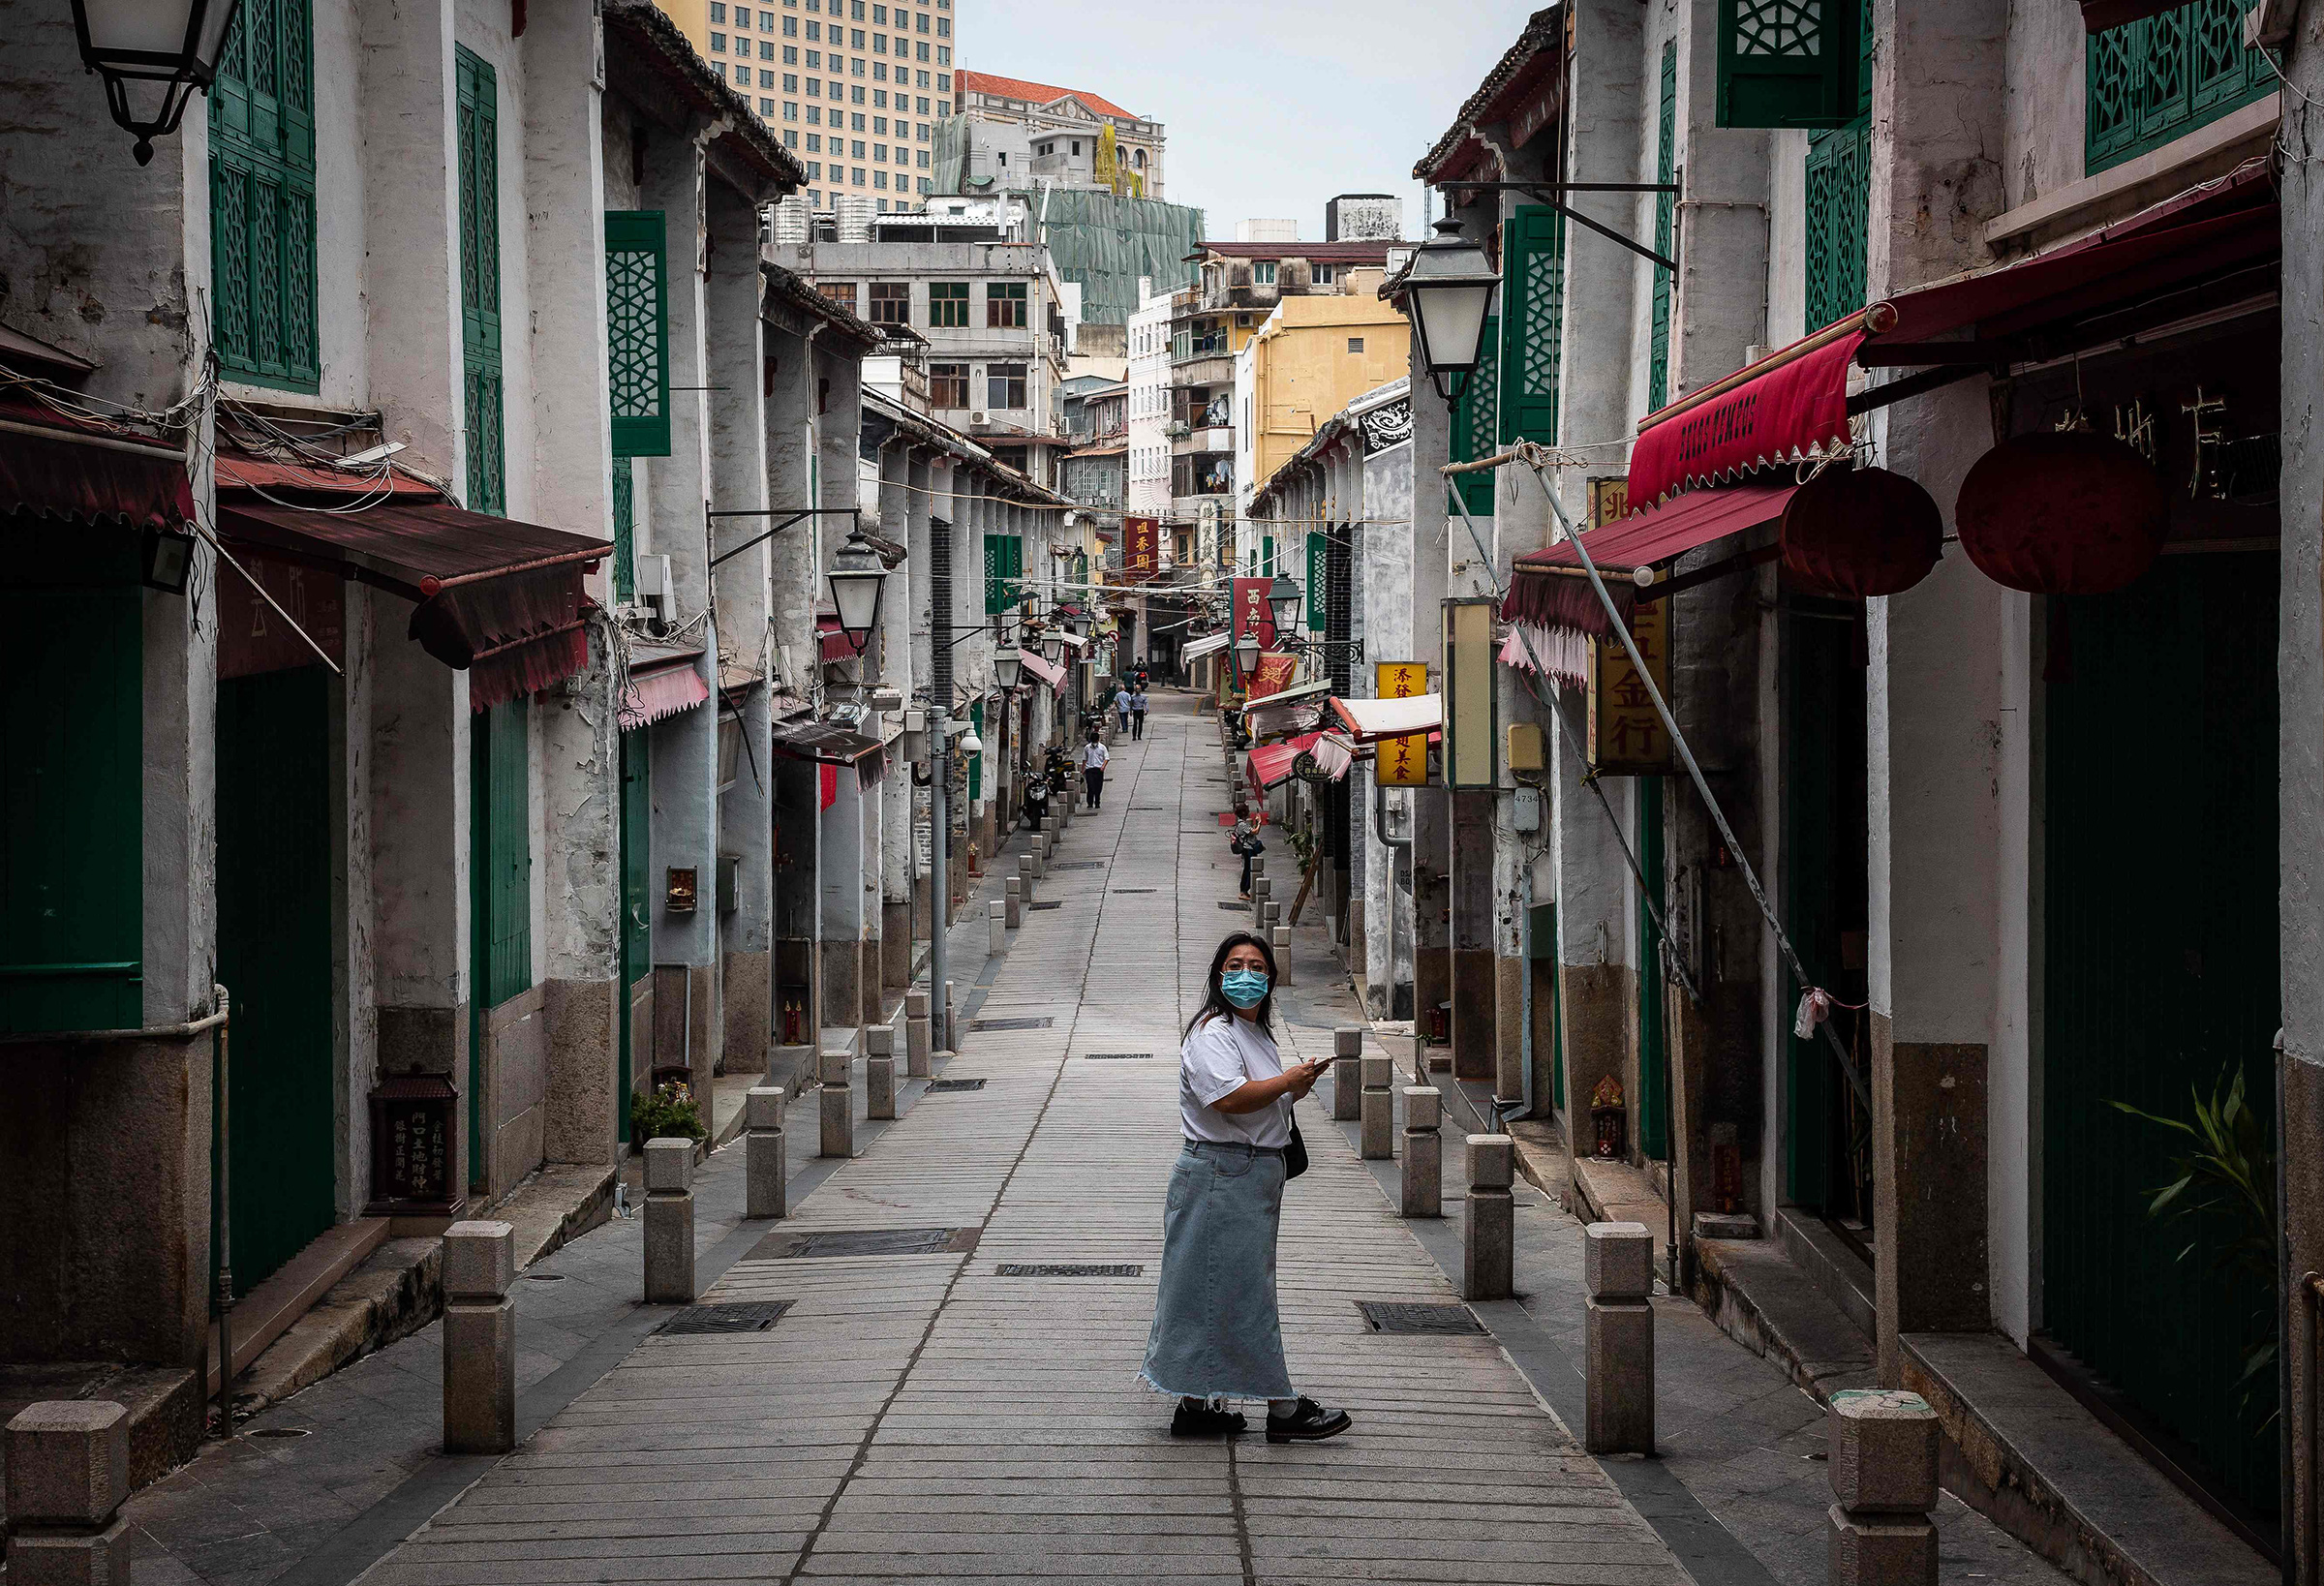 A pedestrian looks on as she walks in a street in the historical centre in Macau on Oct. 10. (Eduardo Leal—AFP/Getty Images)